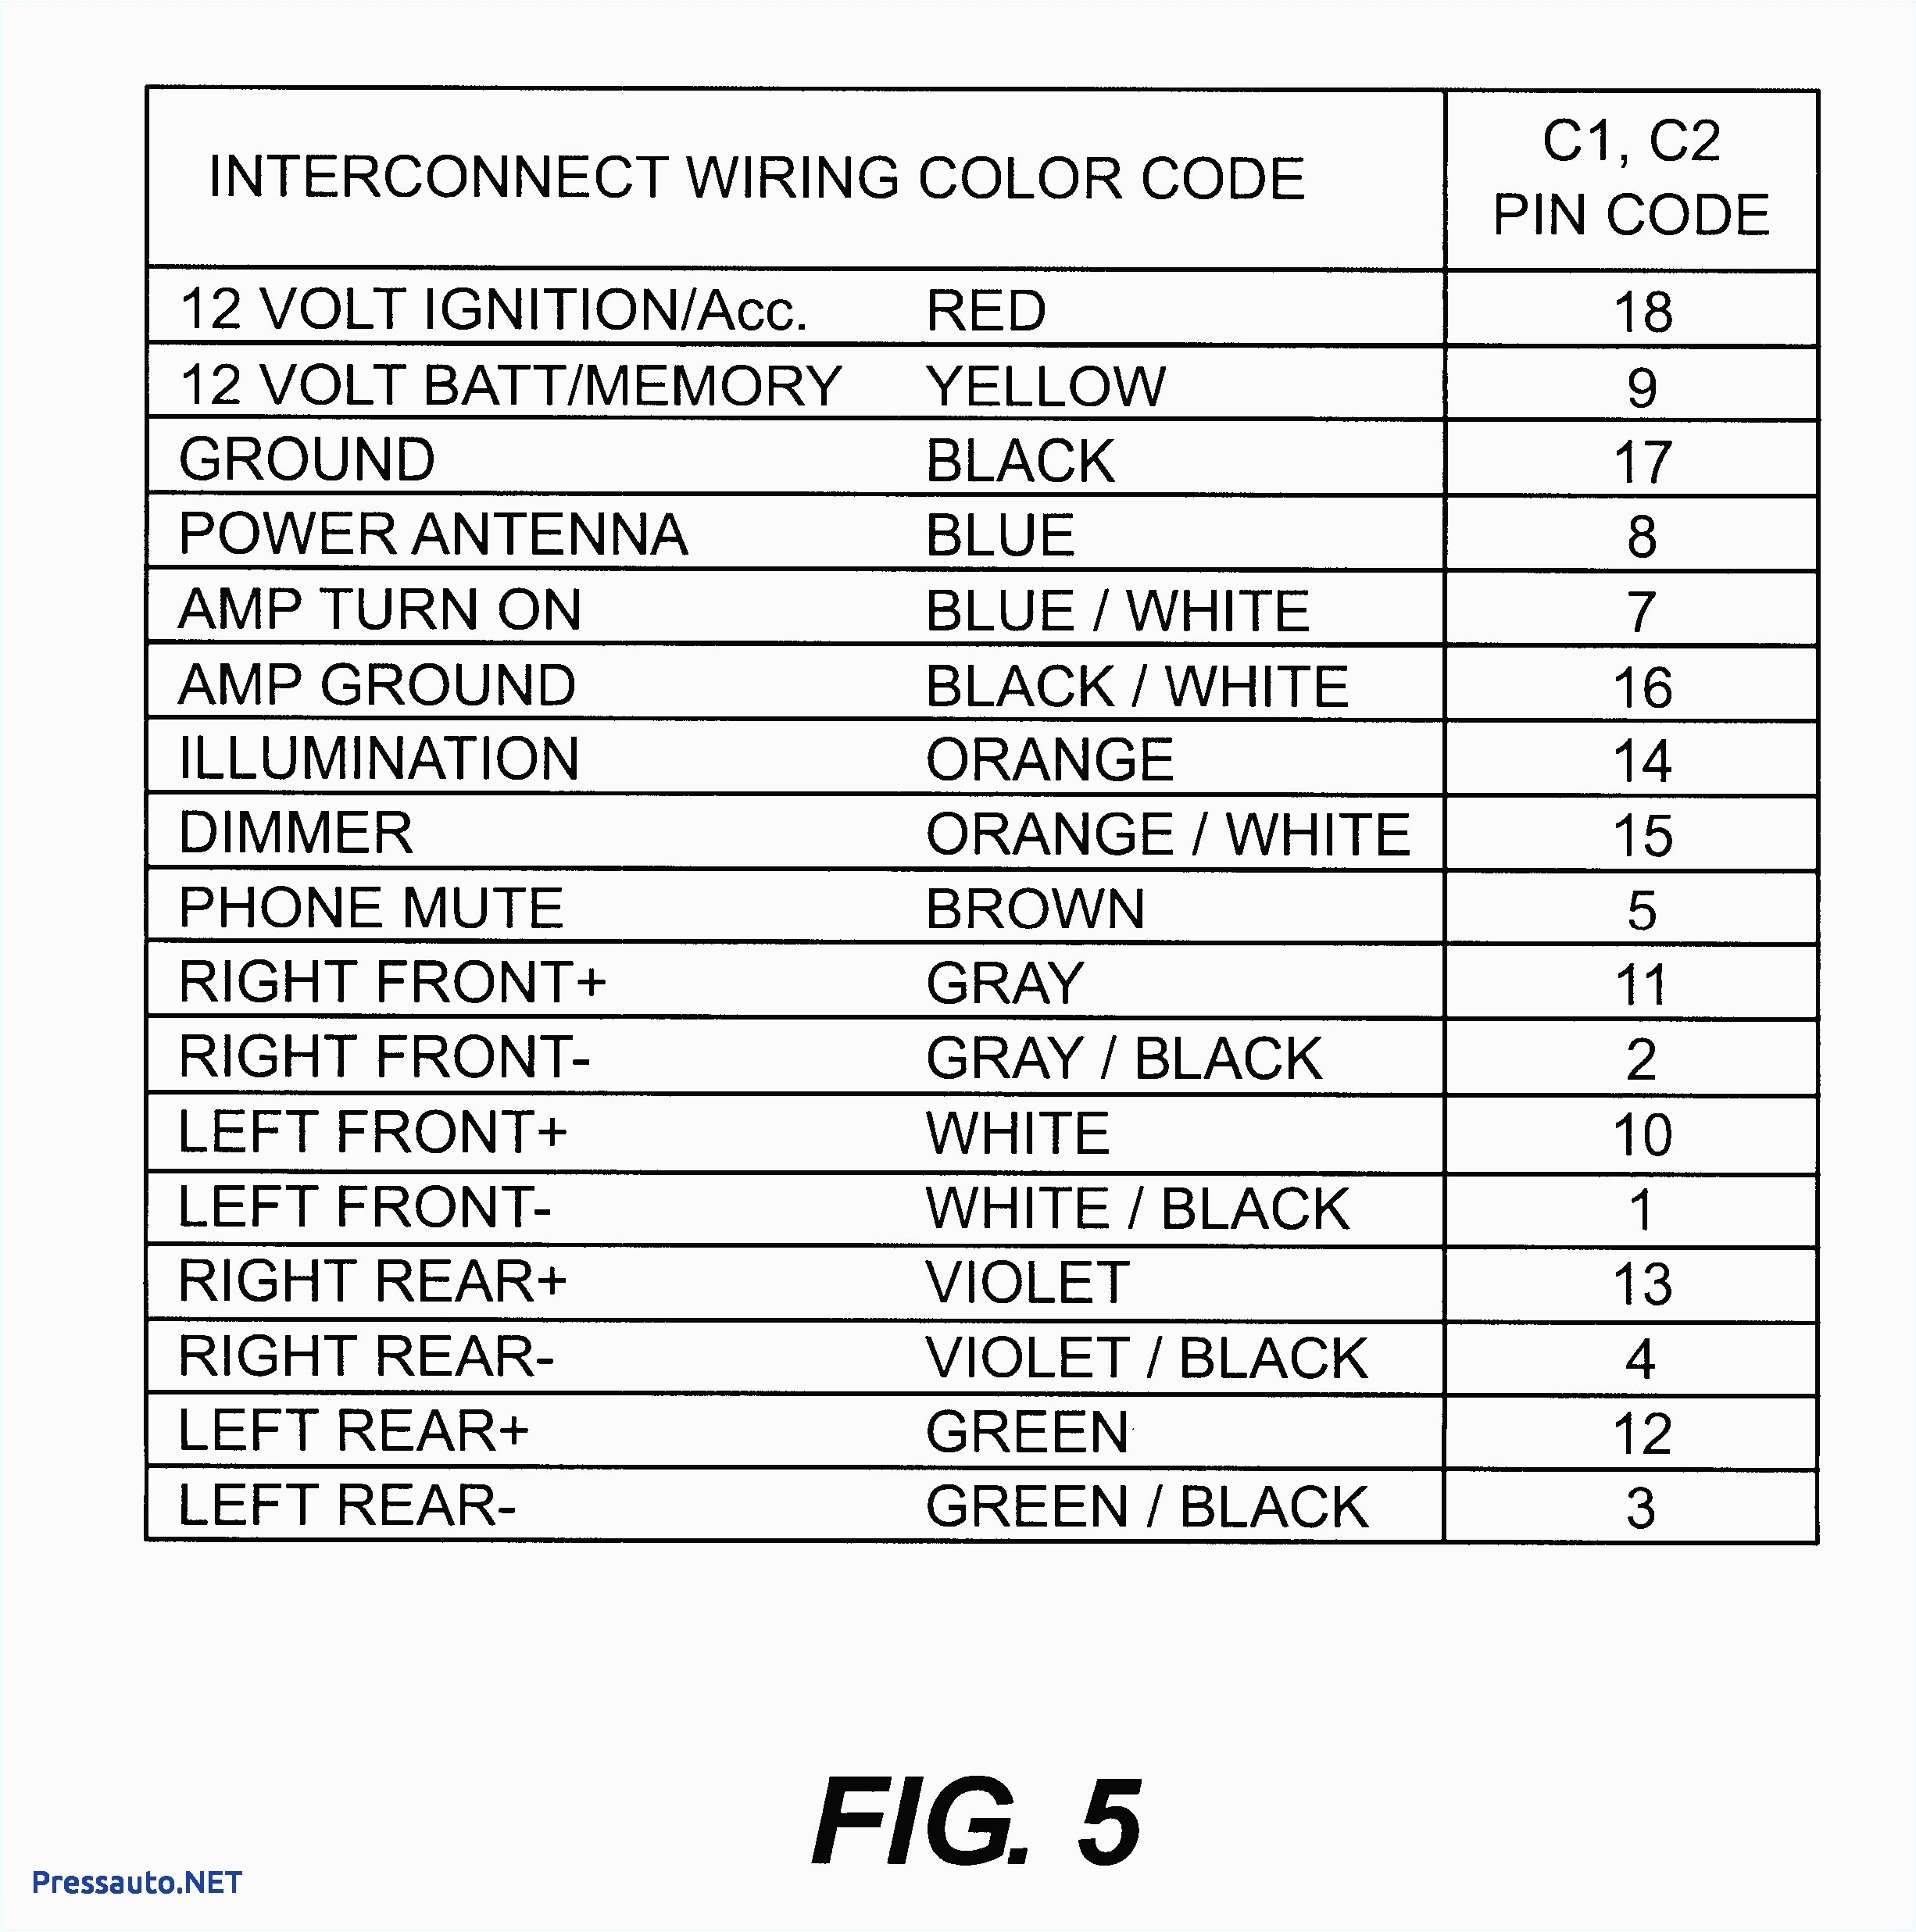 jeep wiring color codes wiring diagram fascinating jeep wiring color codes wiring diagram show jeep wiring